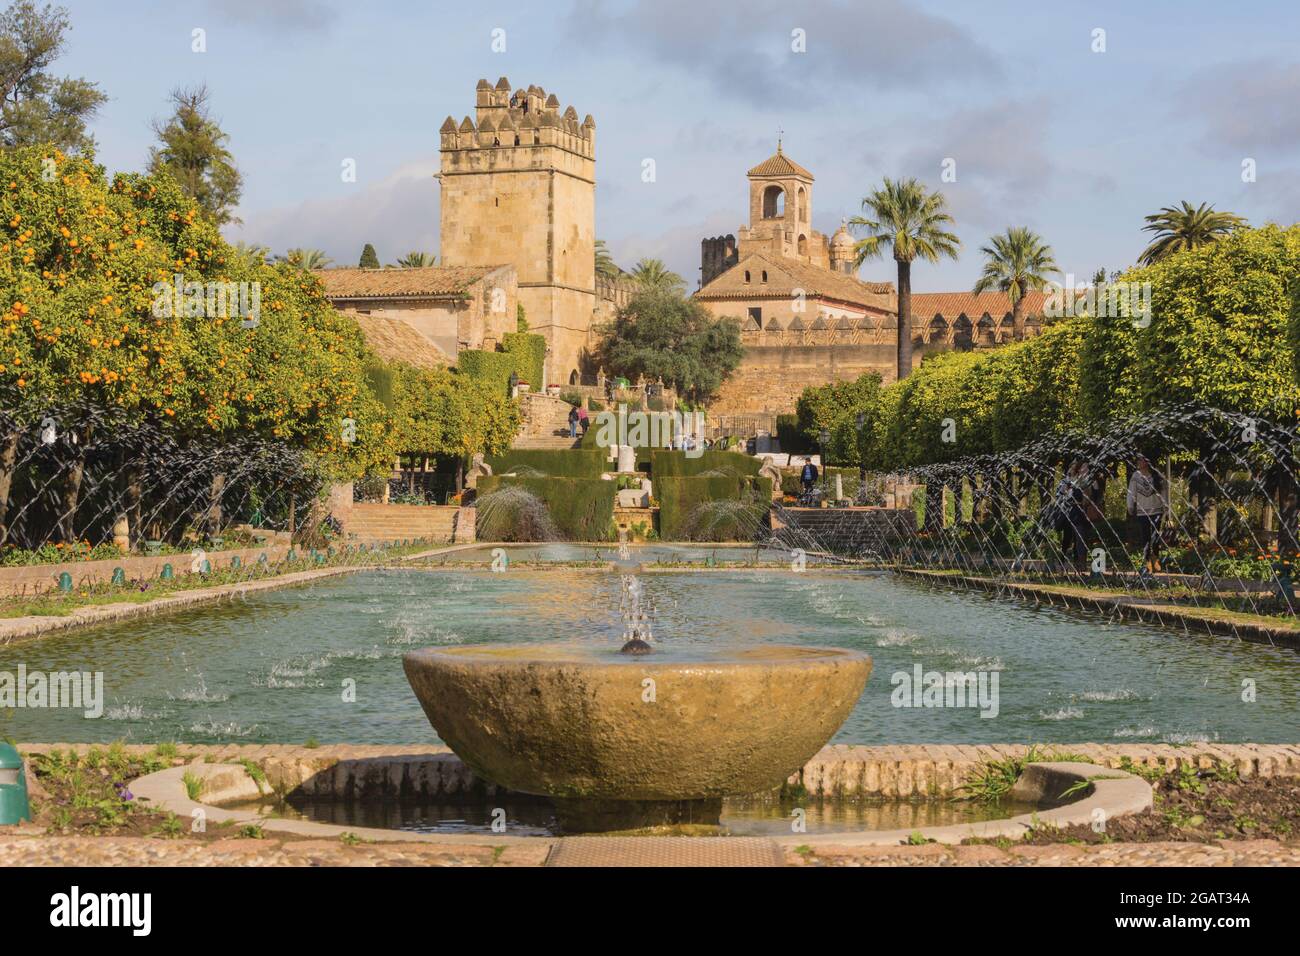 Cordoba, Cordoba Province, Andalusia, southern Spain.  Alcazar de los Reyes Cristianos, palace-fortress of the Christian Kings, seen from gardens of t Stock Photo